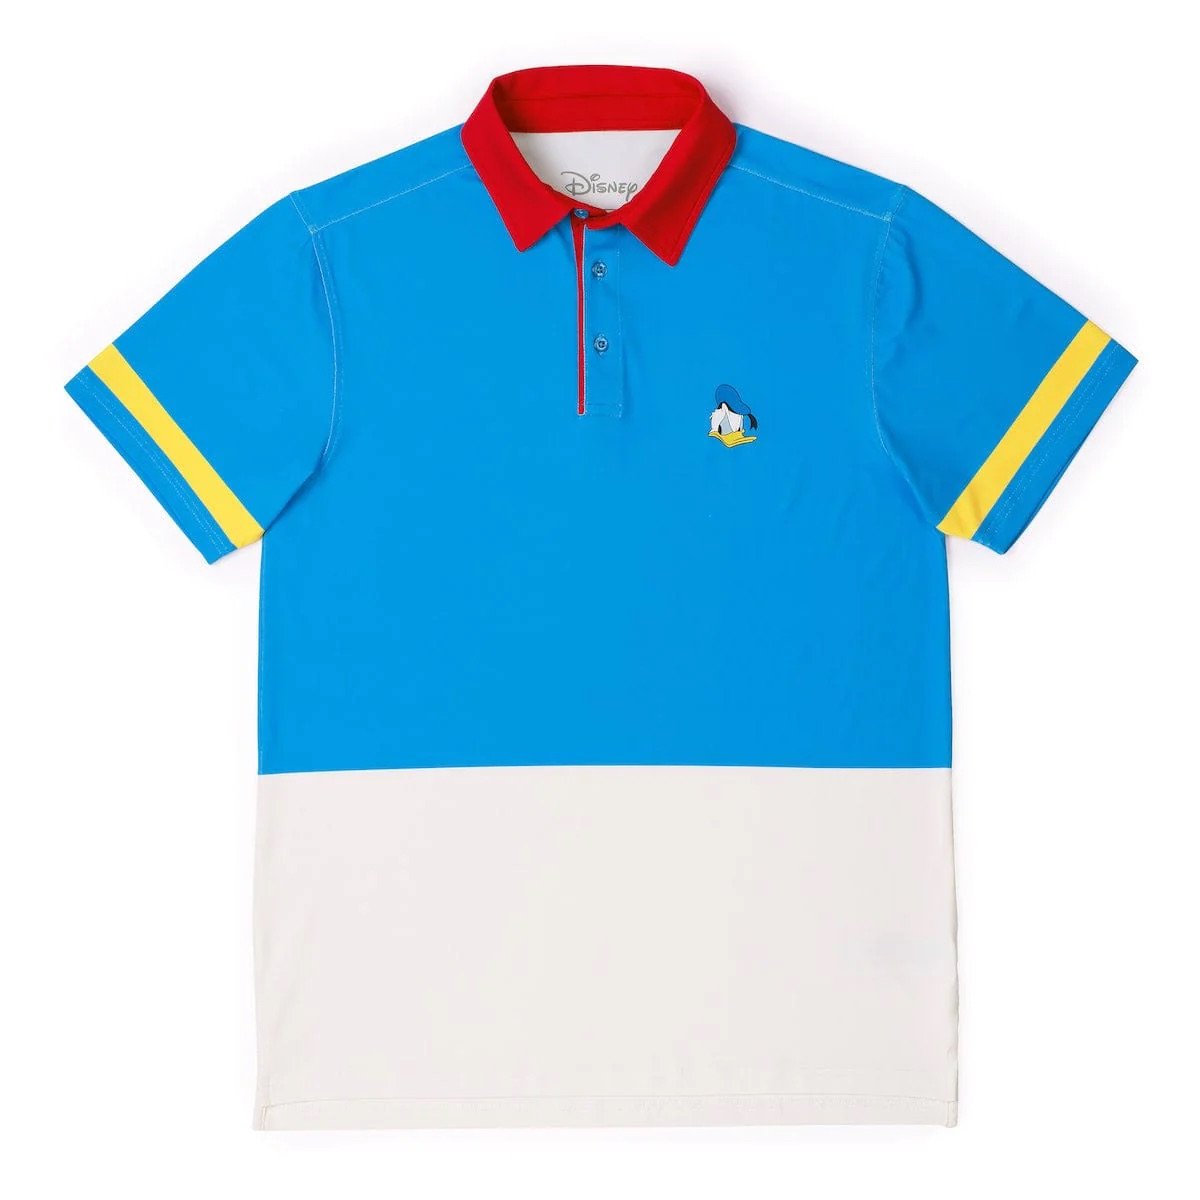 "Donald Duckin' It" All-Day Polo